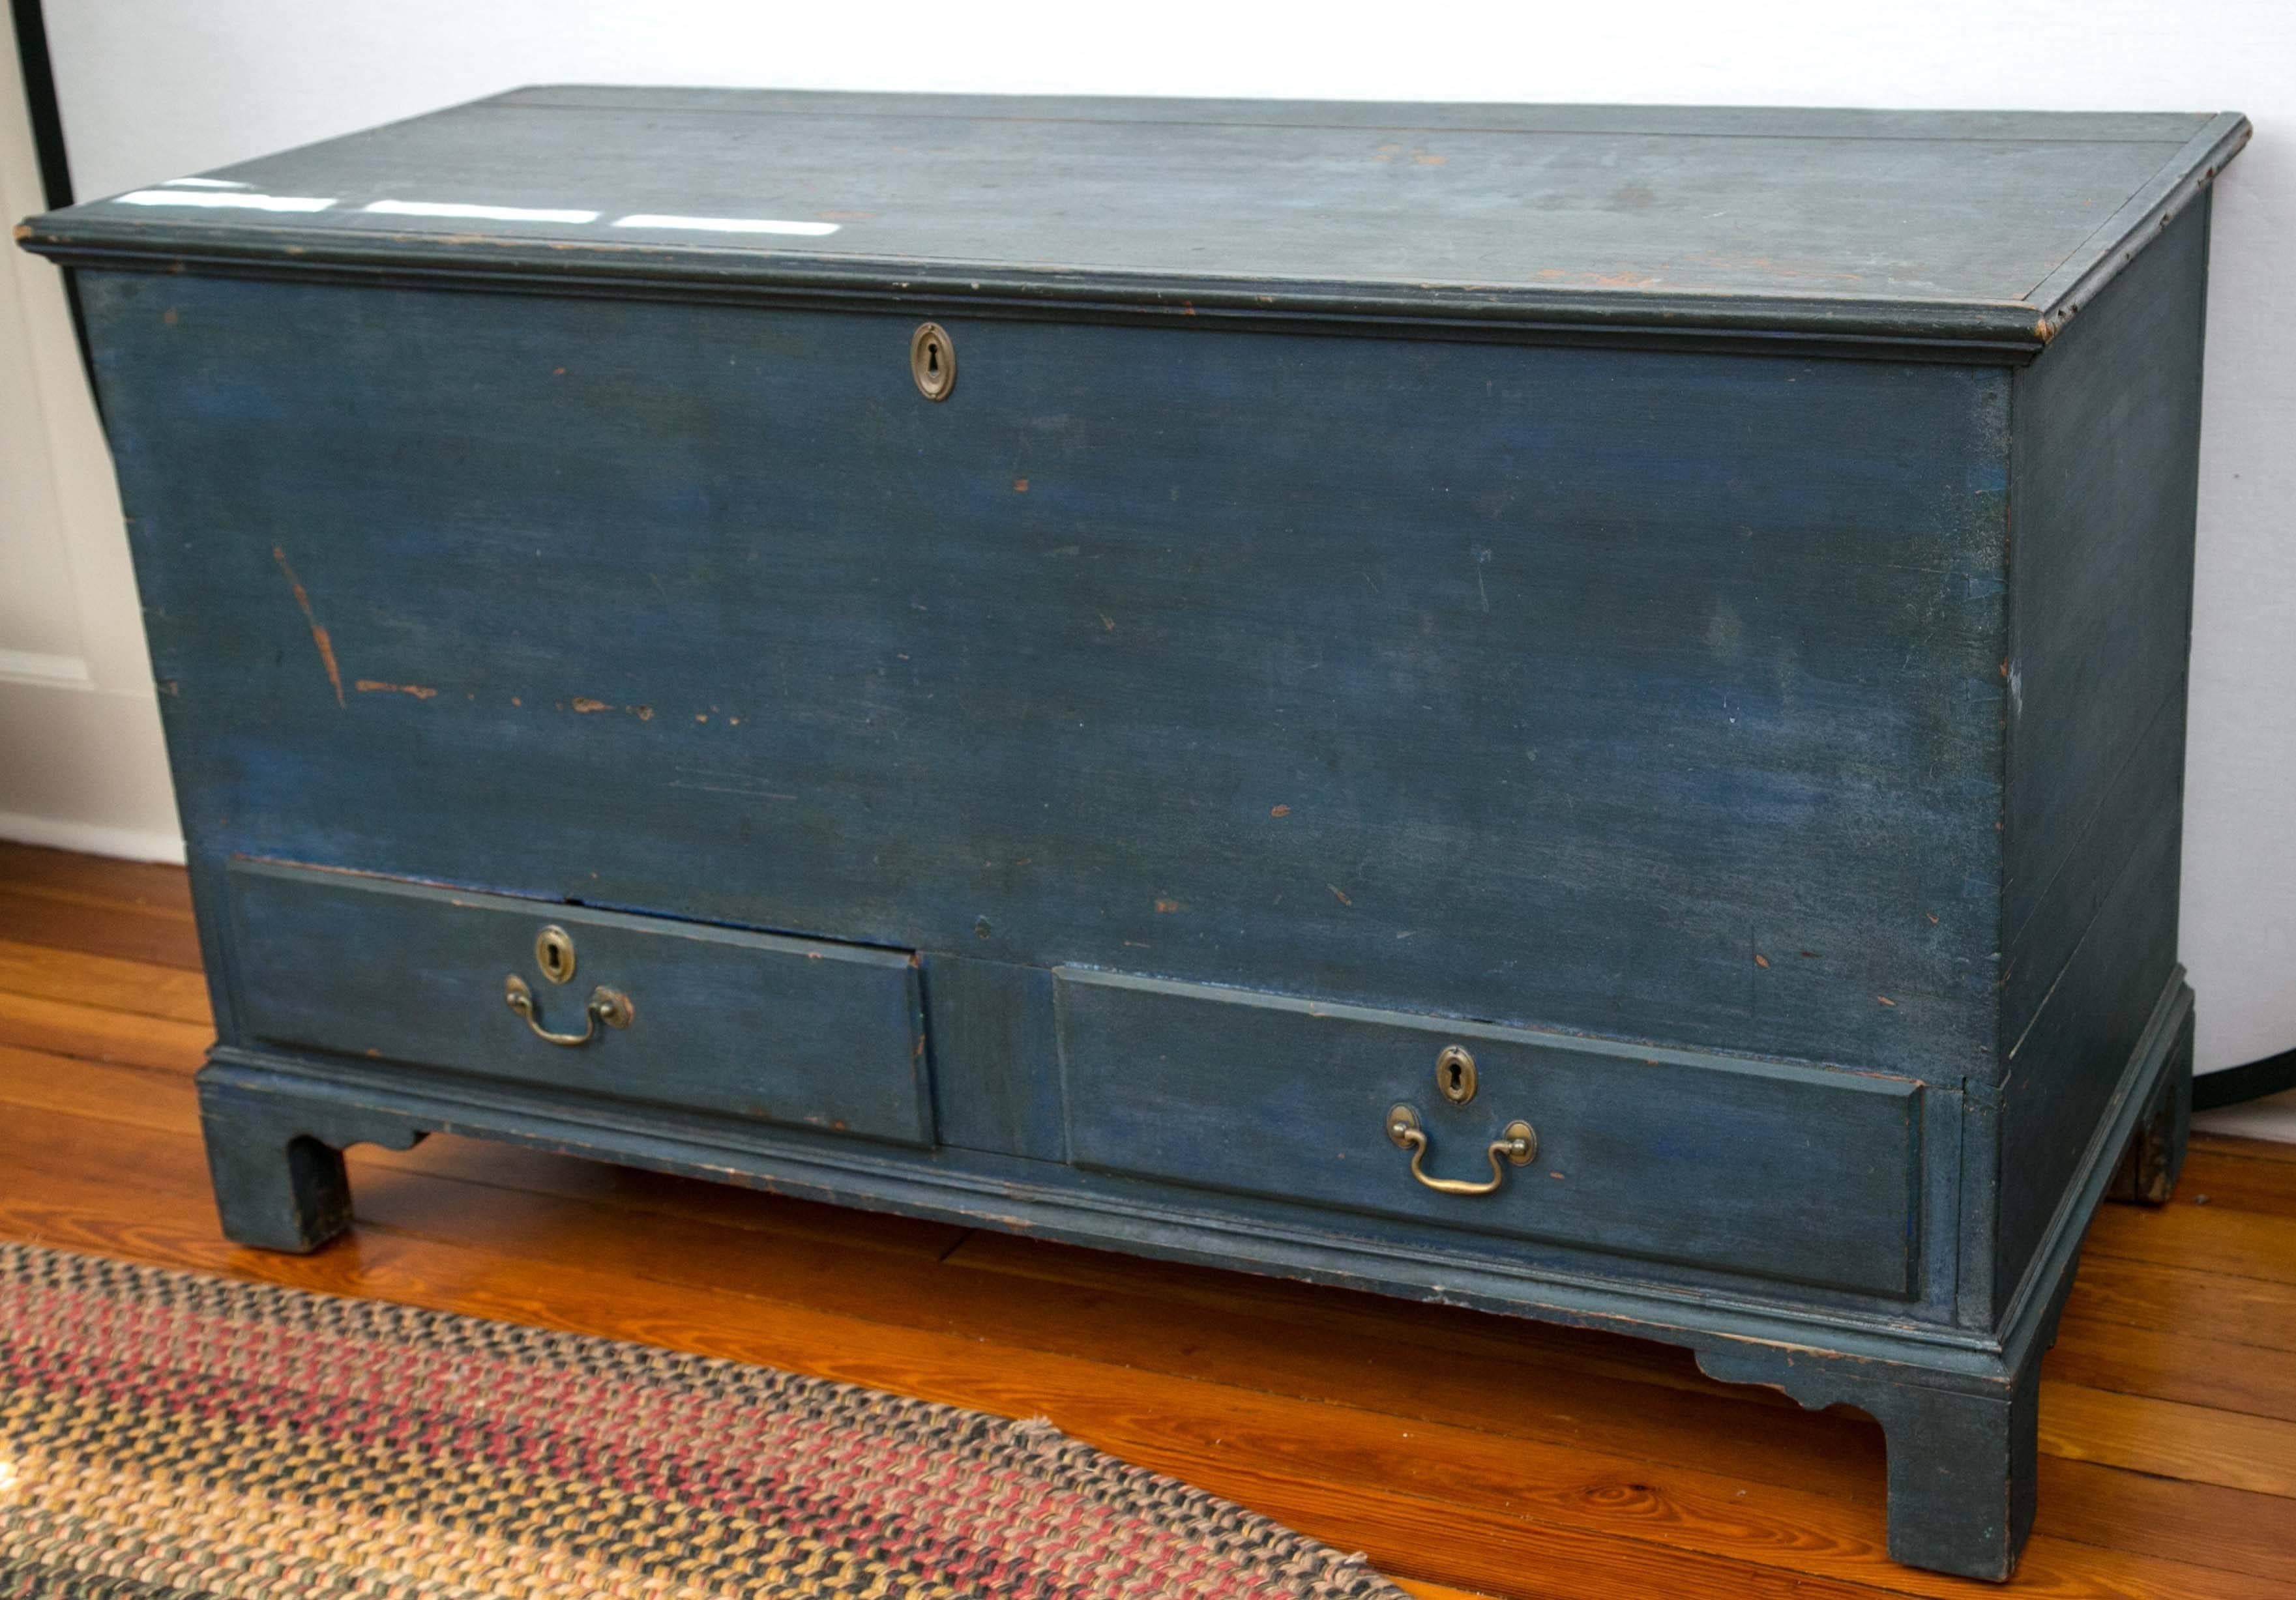 Wonderful Chippendale poplar and yellow pine bracket base, two drawer dovetailed blanket chest in great early dry blue painted surface featuring original bail brasses and escutcheons and interior lidded till. Great proportions and size. Good for